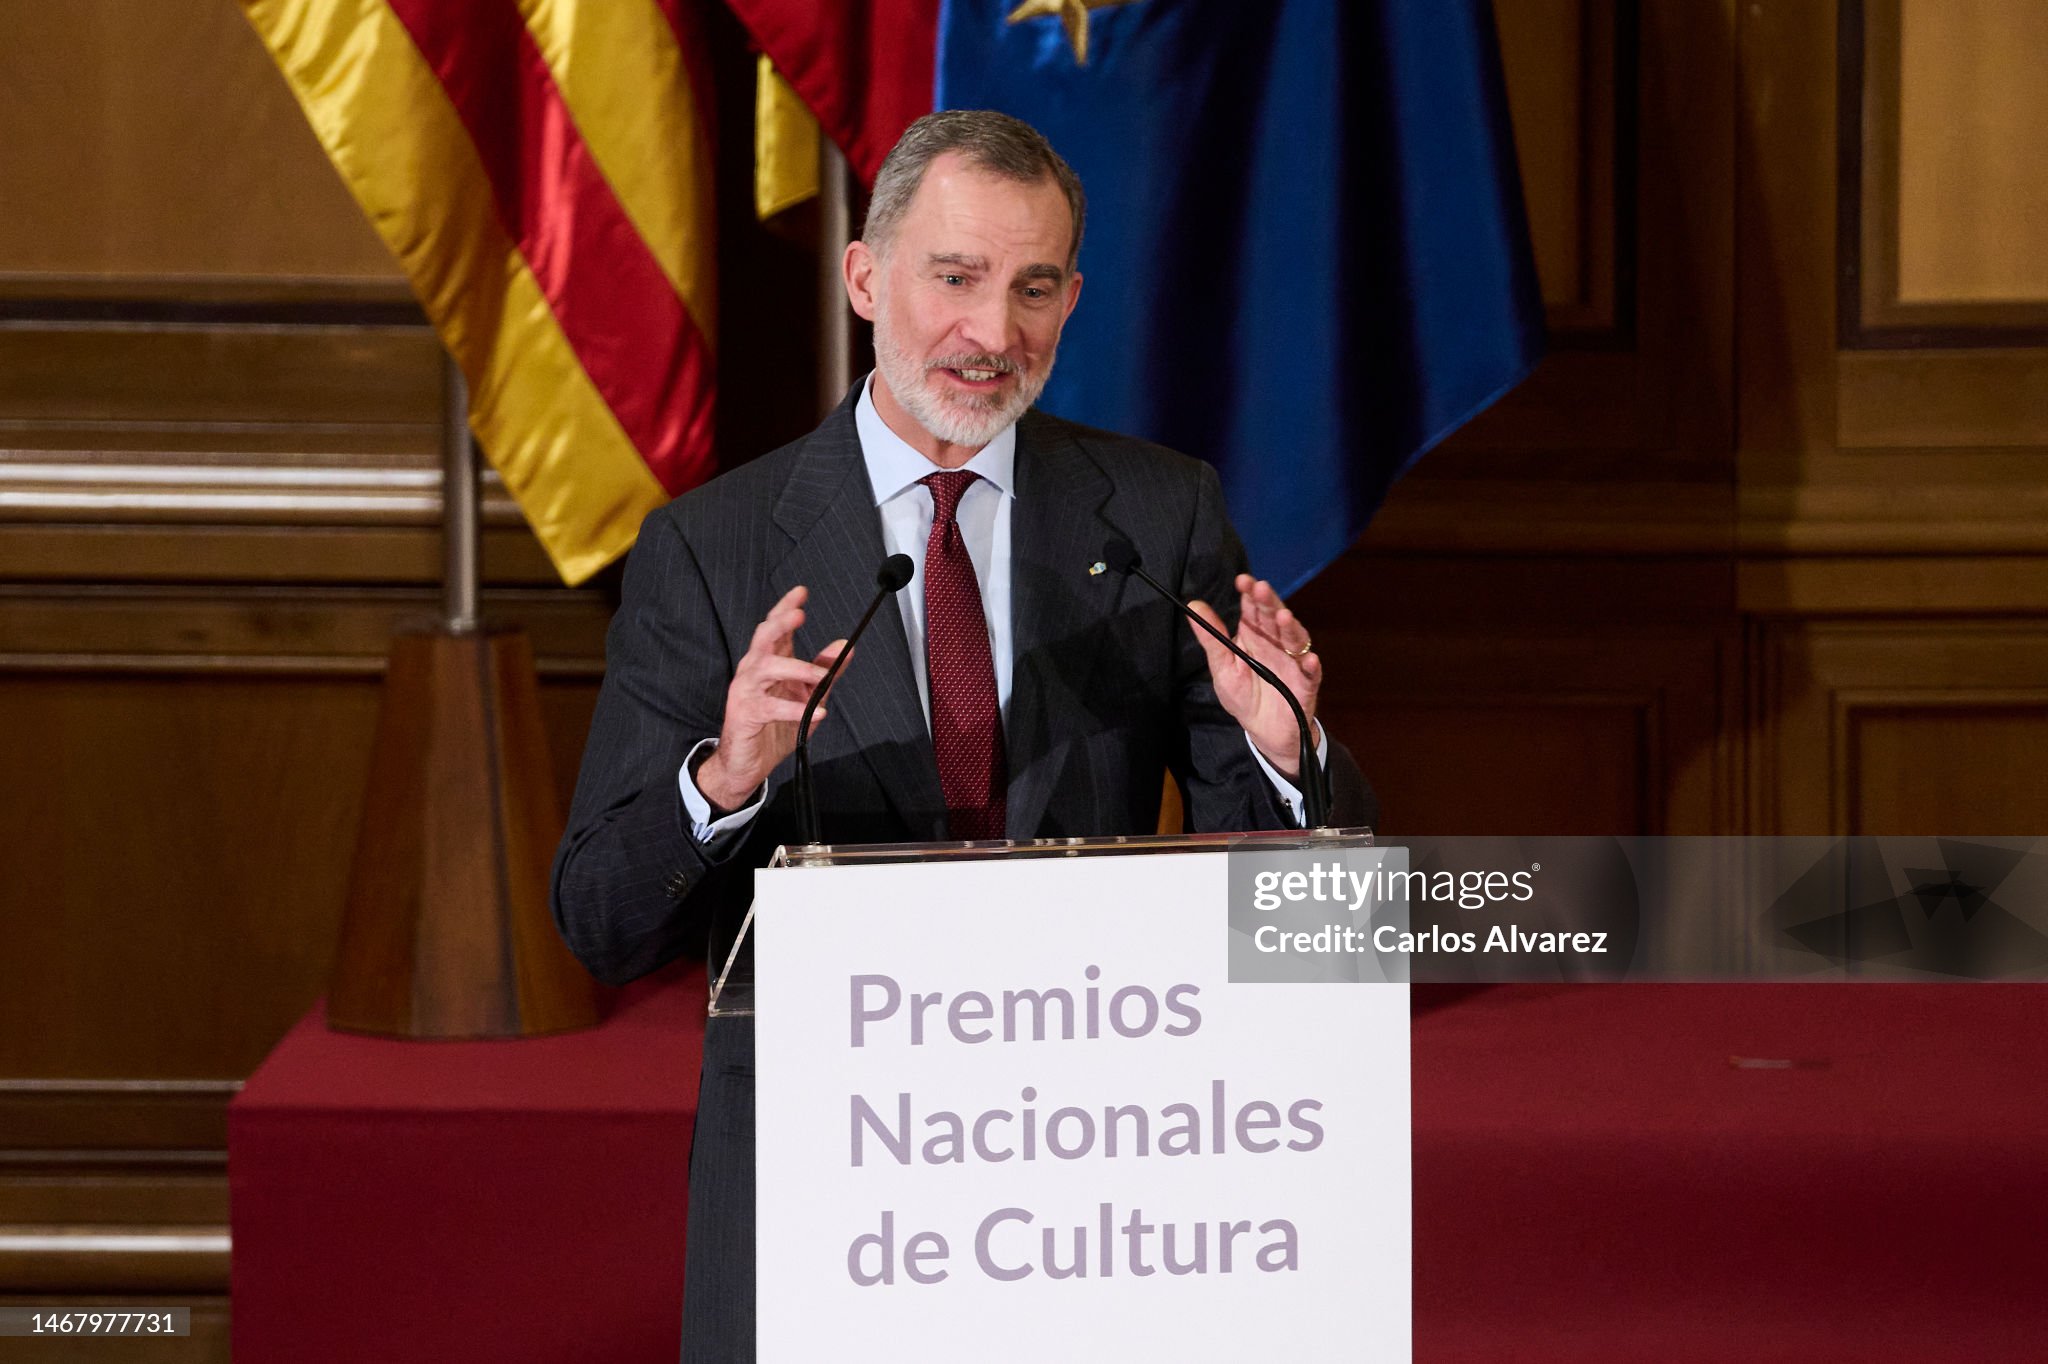 king-felipe-vi-of-spain-gives-a-speech-during-the-national-culture-awards-2021-at-the.jpg